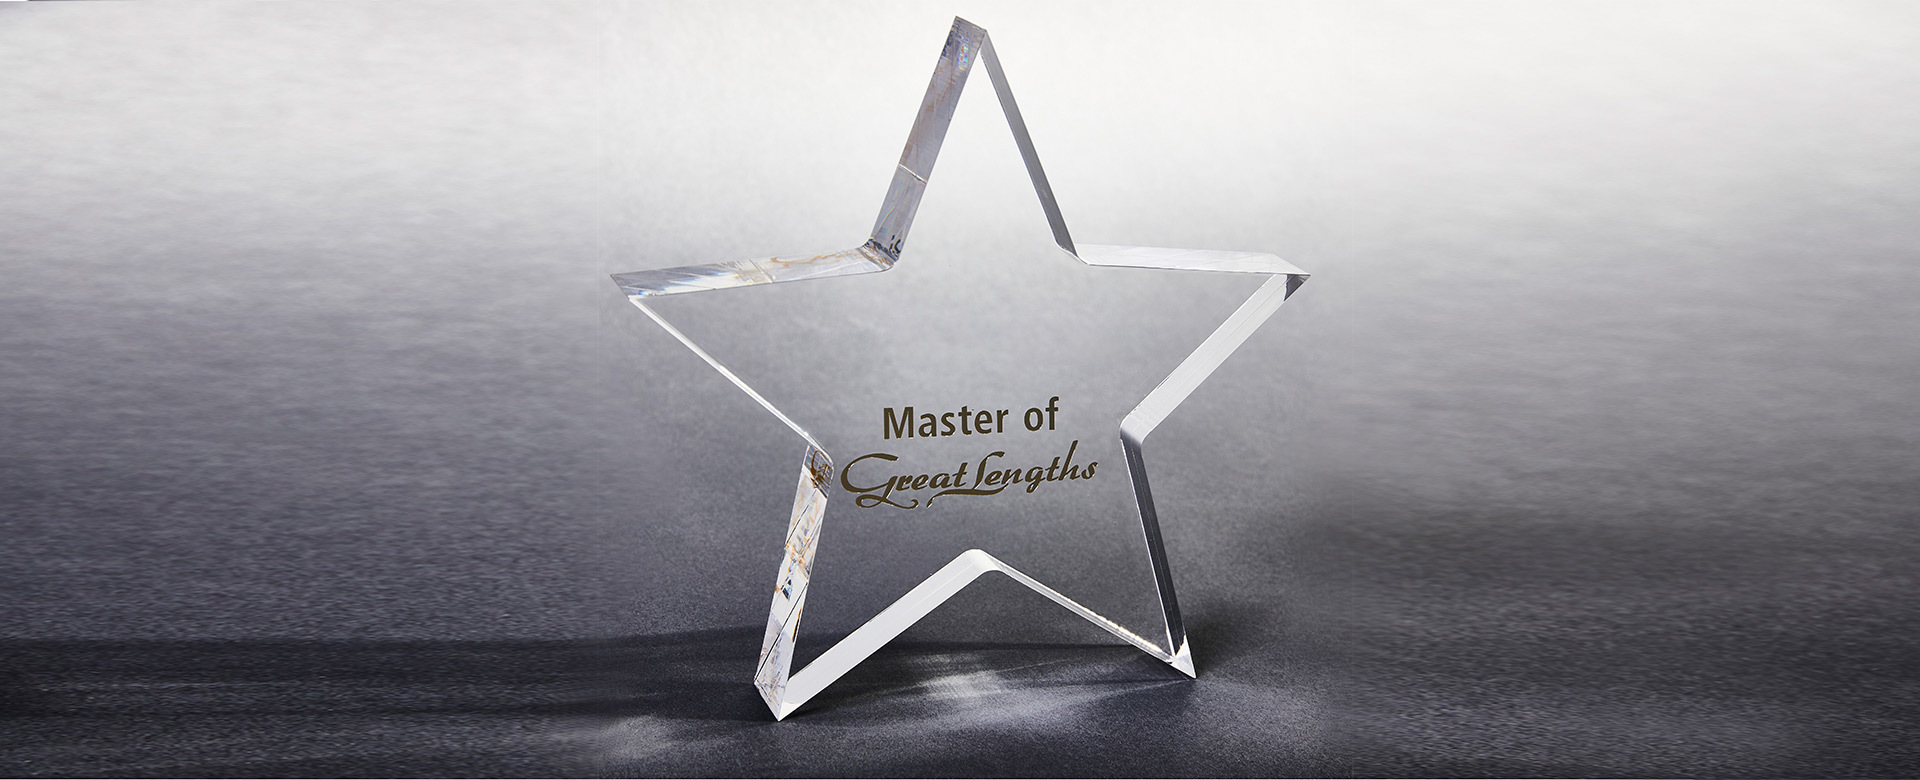 Master of Great Lengths Trophy (© Great Lengths)